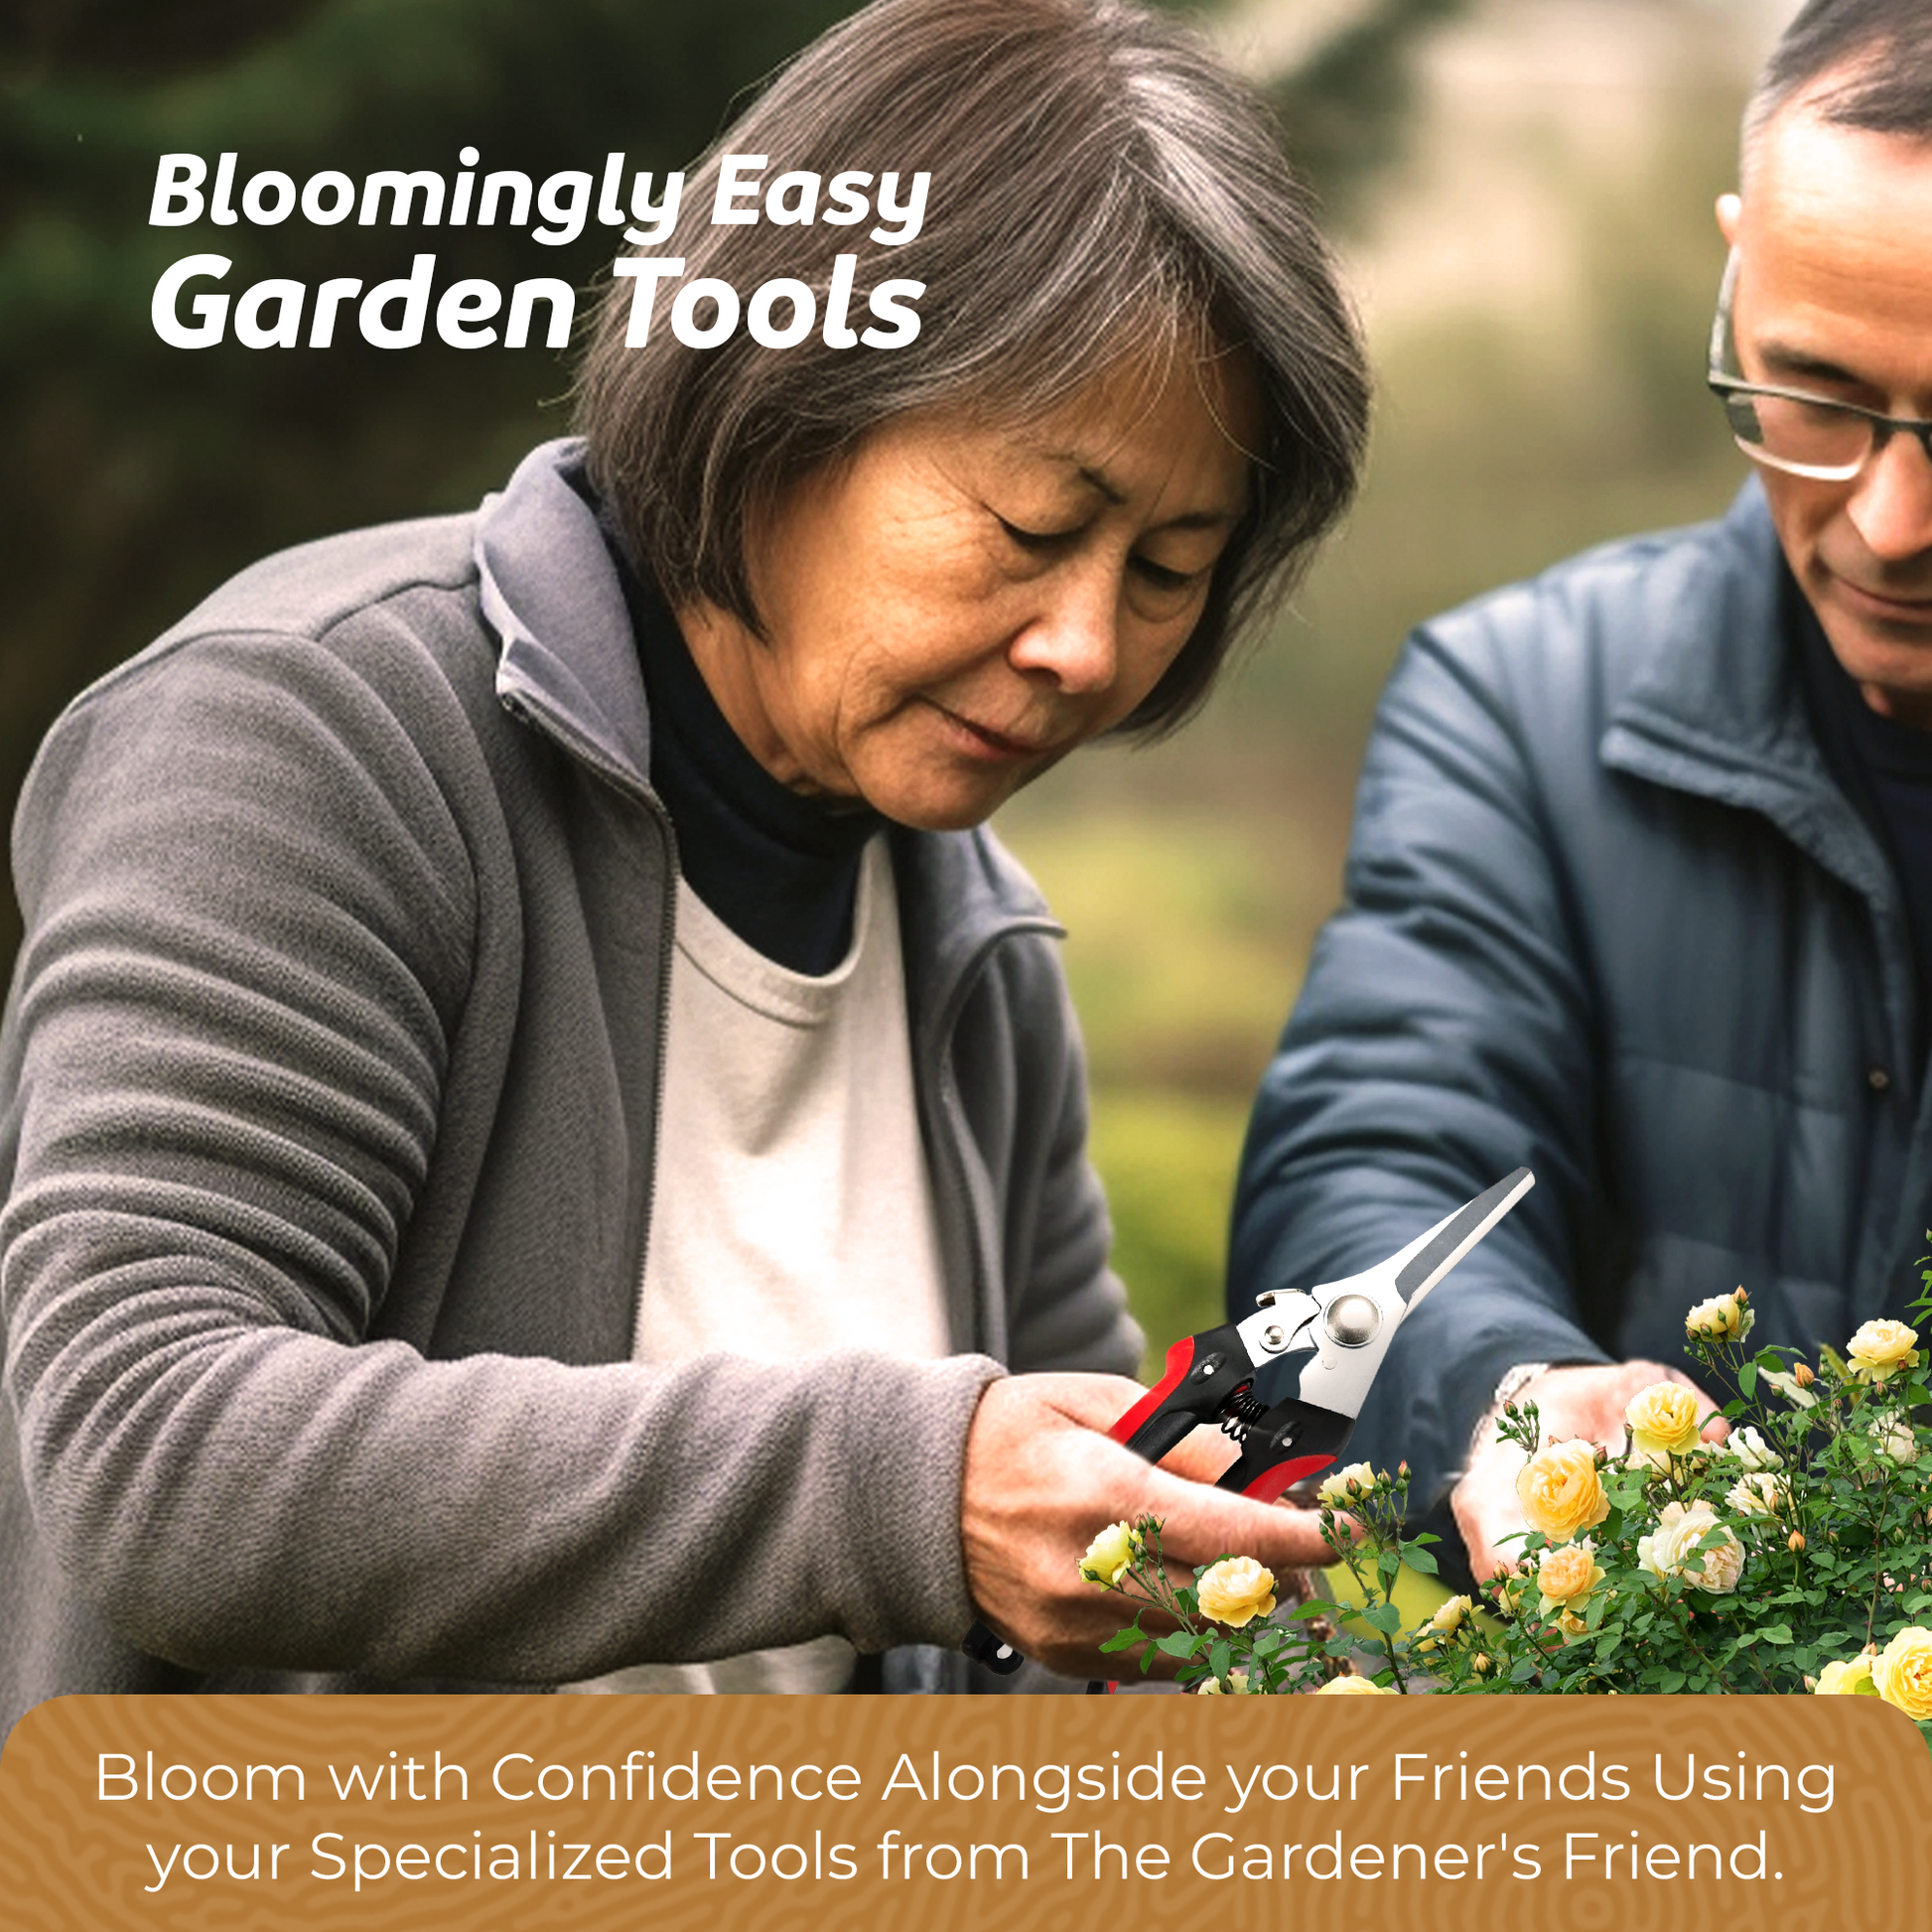 Using specialized tools from The Gardener's Friend to bloom with confidence alongside friends.